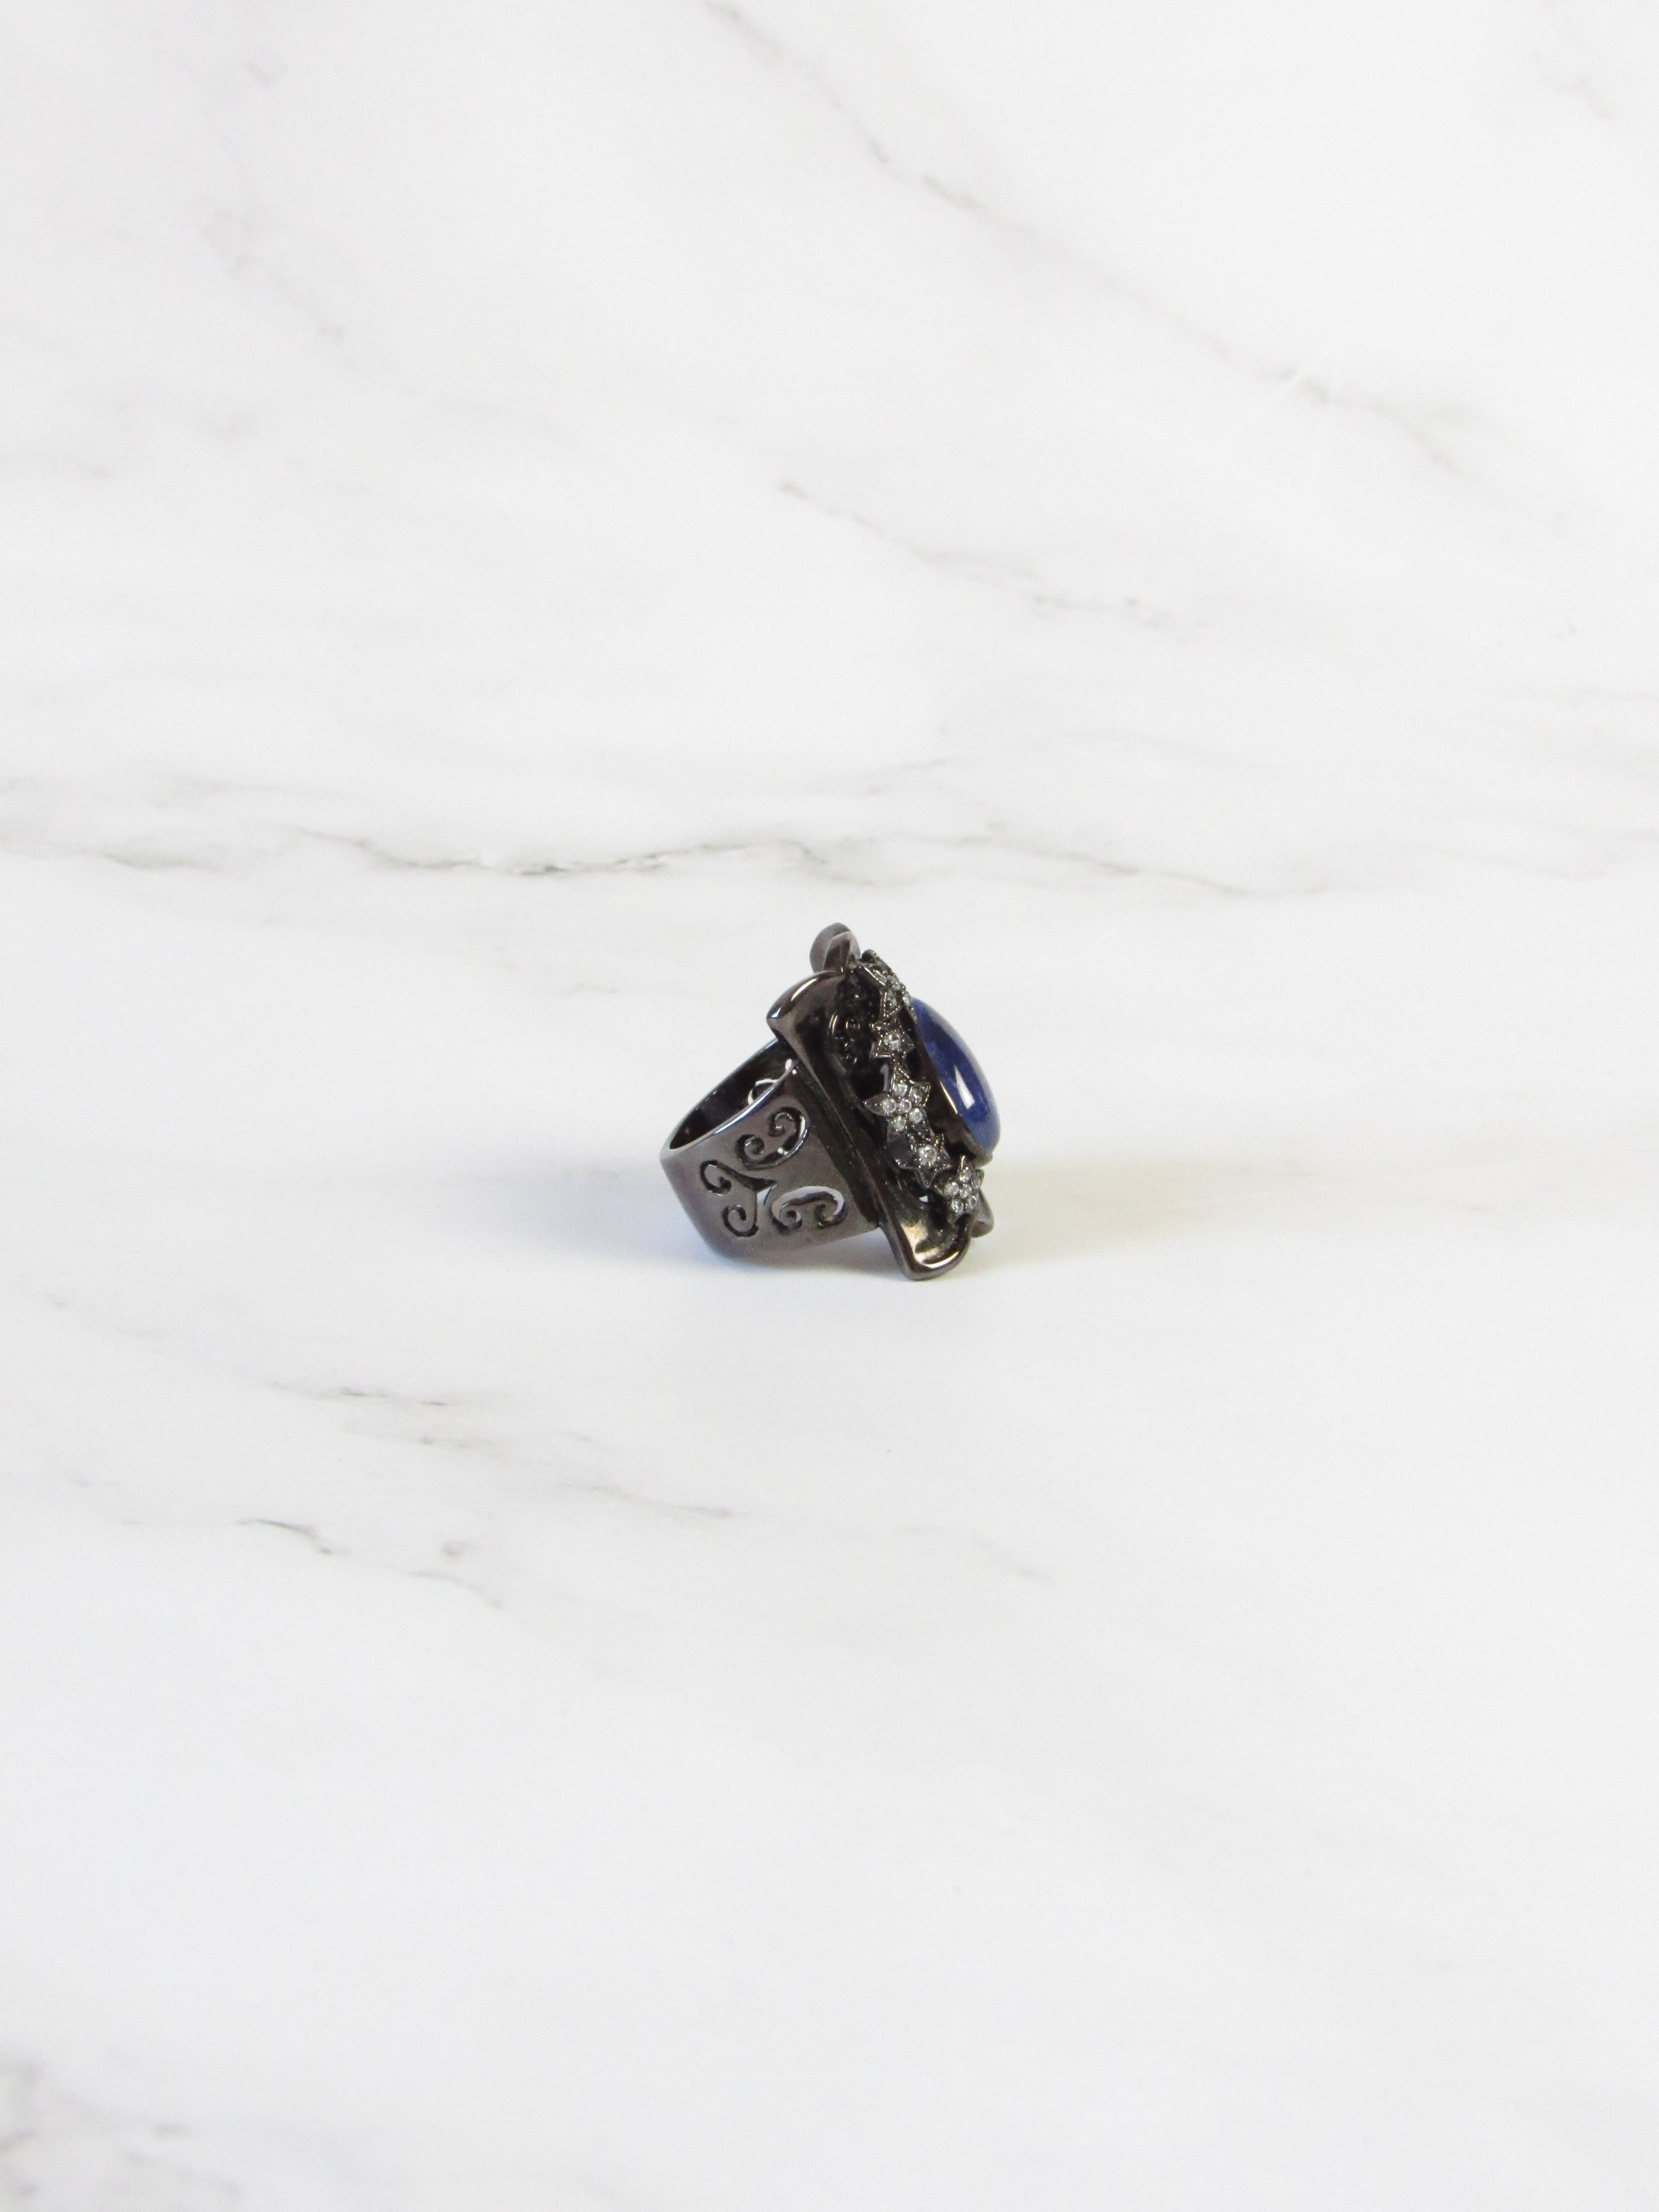 One-of-a-kind Iolite Oxidized Silver Statement Ring